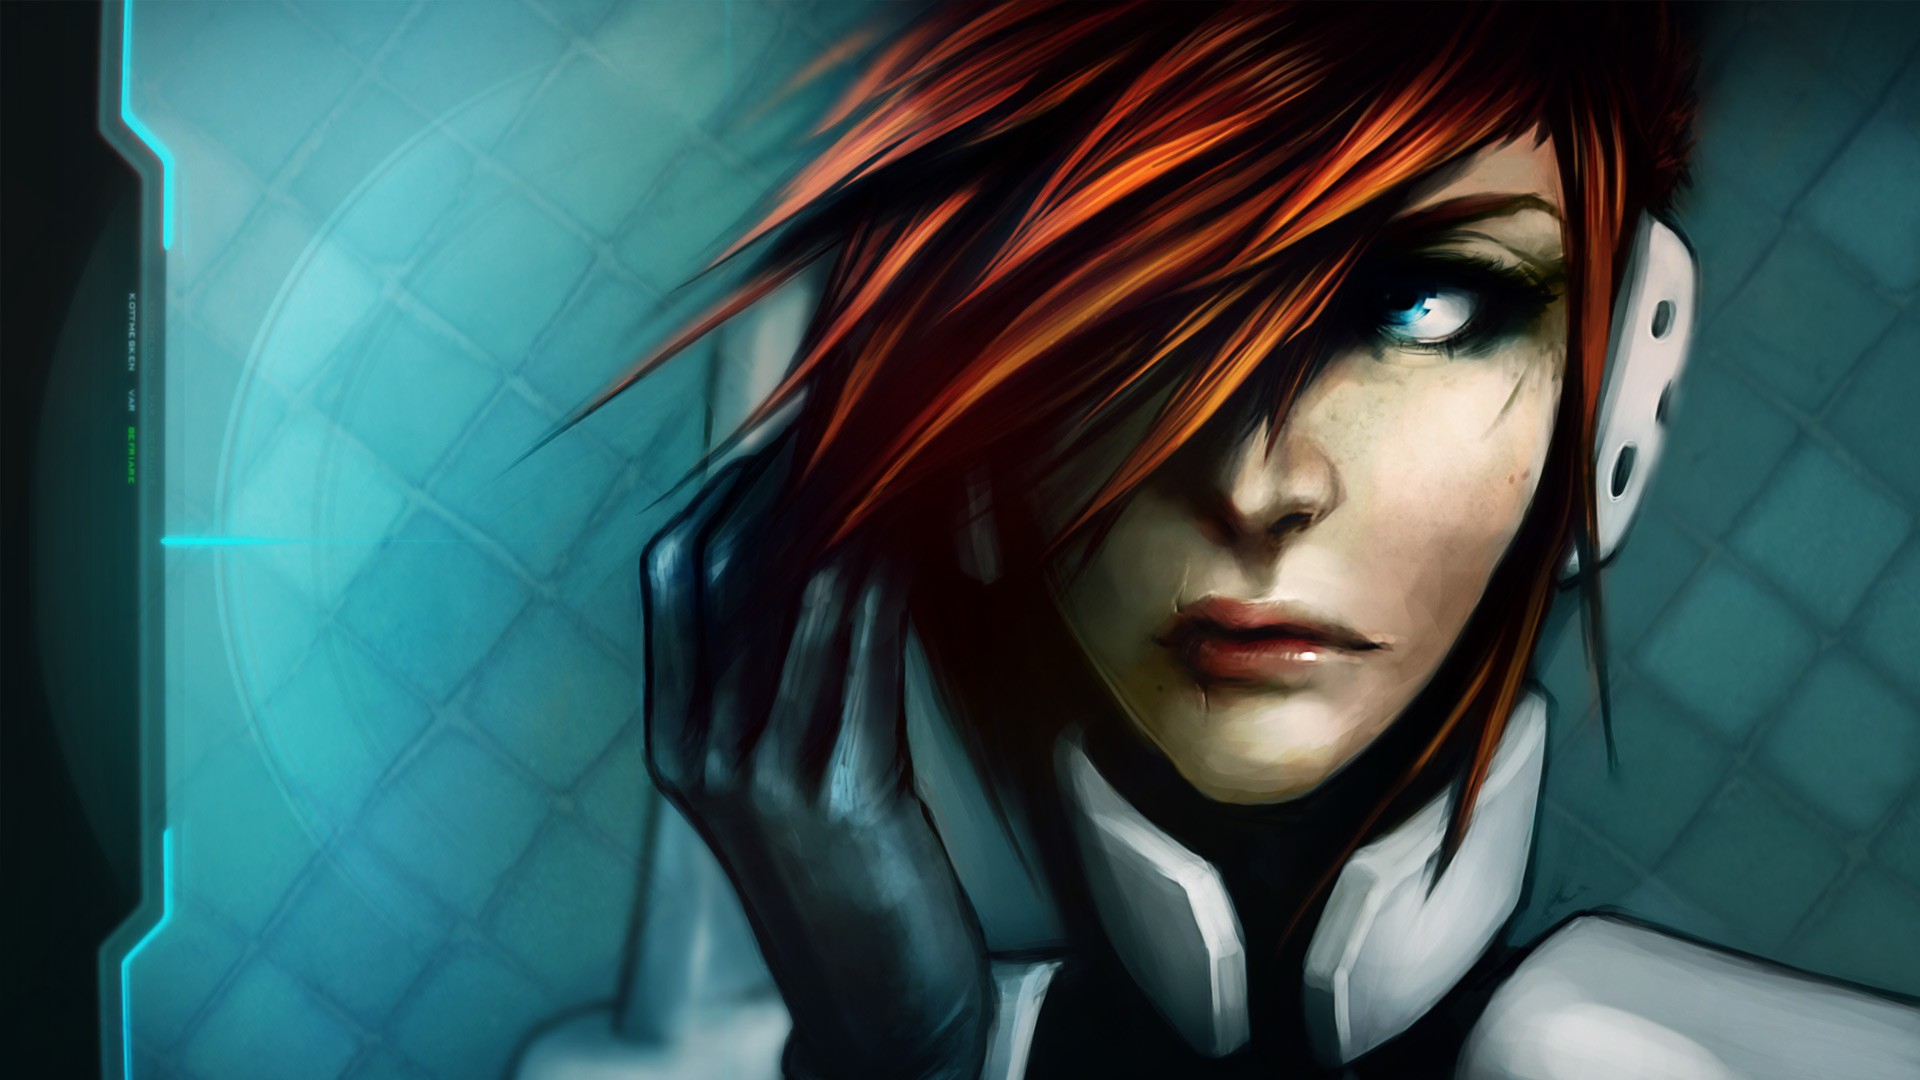 General 1920x1080 women redhead blue eyes video game art turquoise cyan video games hair over one eye face